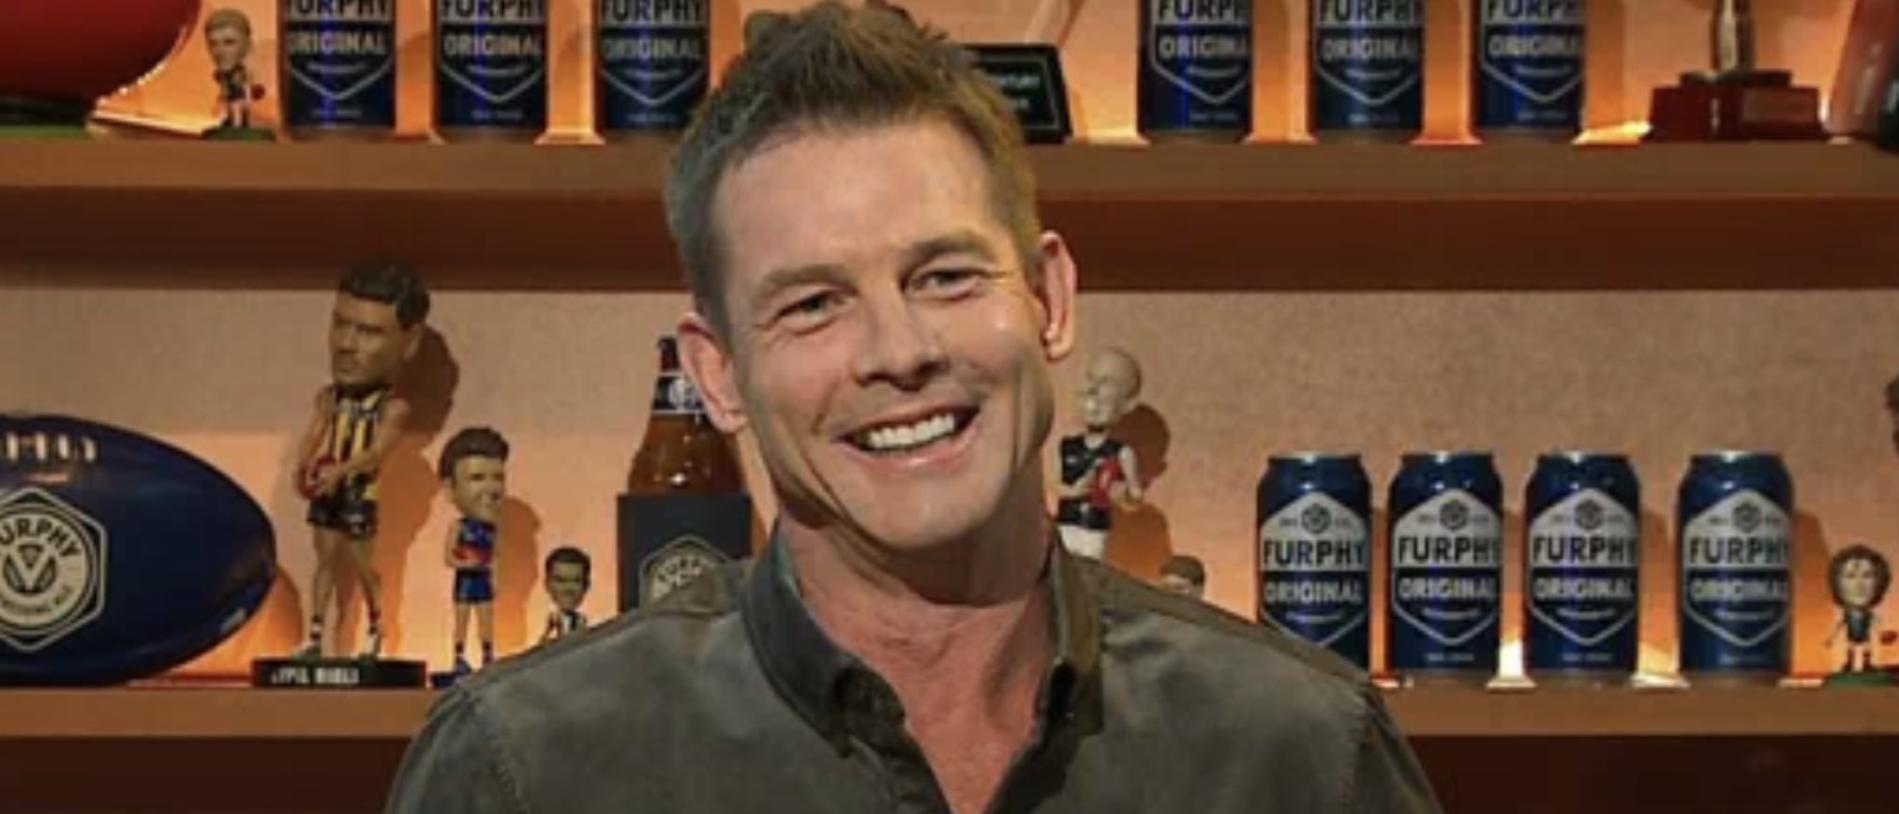 Former AFL star turned media personality Ben Cousins has briefly spoken on his personal life following years of struggle with drug abuse.